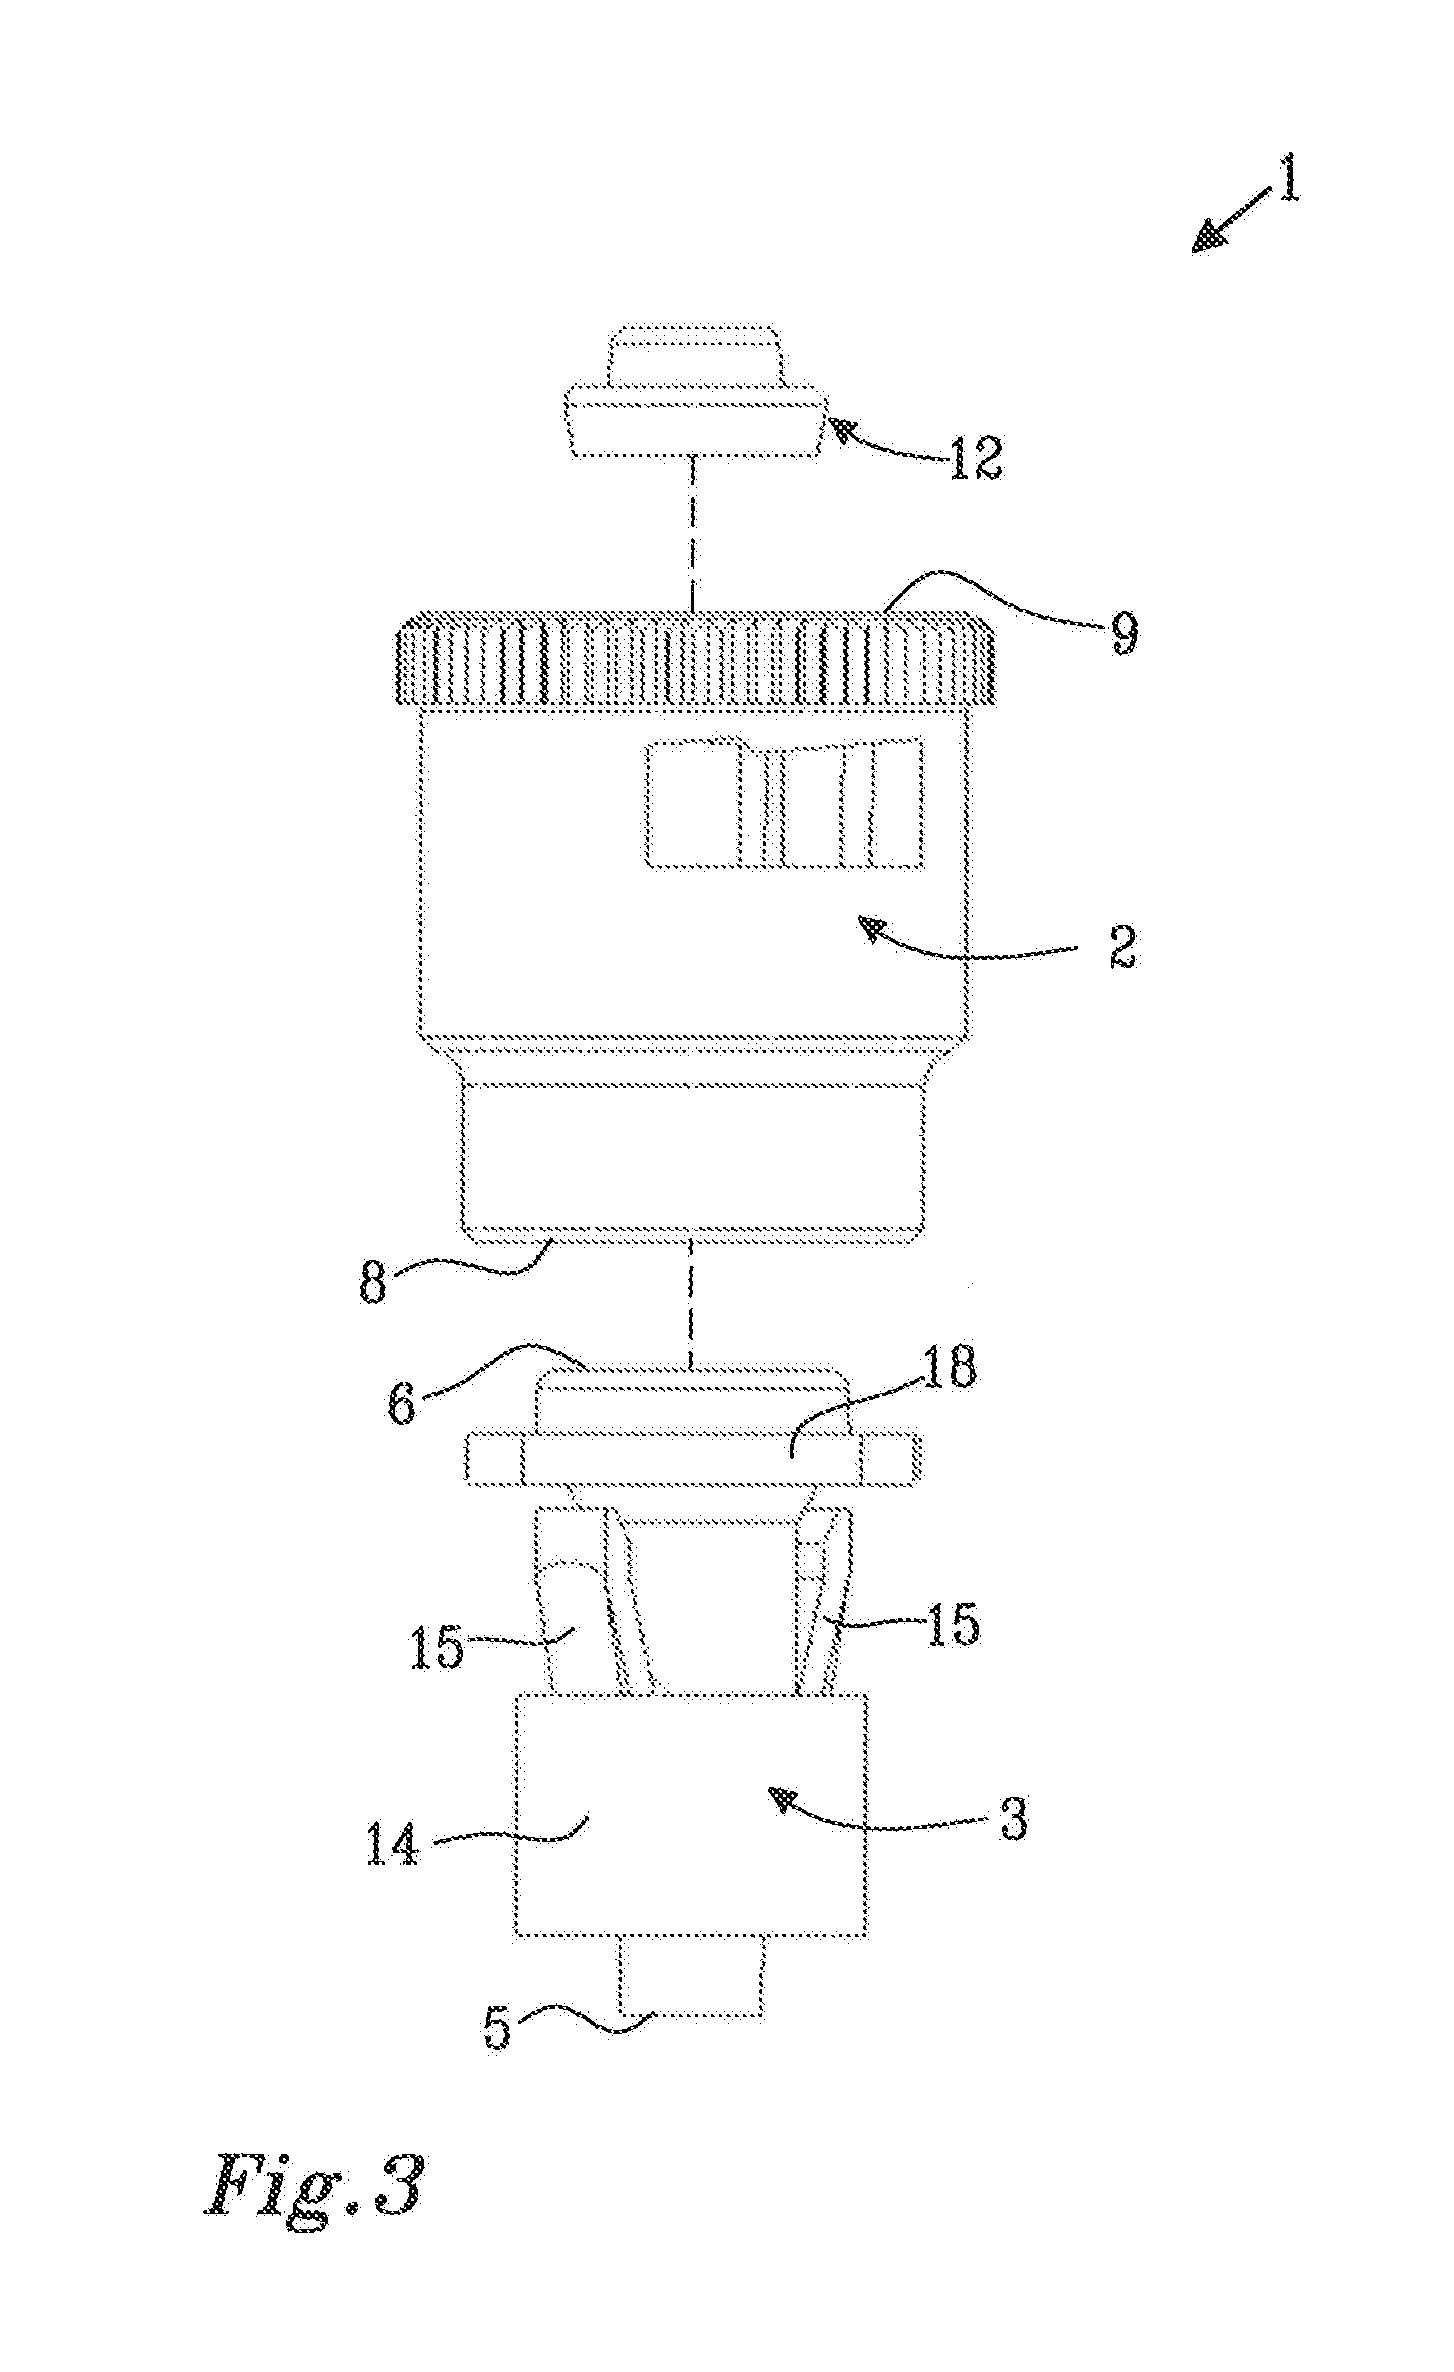 Arrangement in a Medical Connector Device